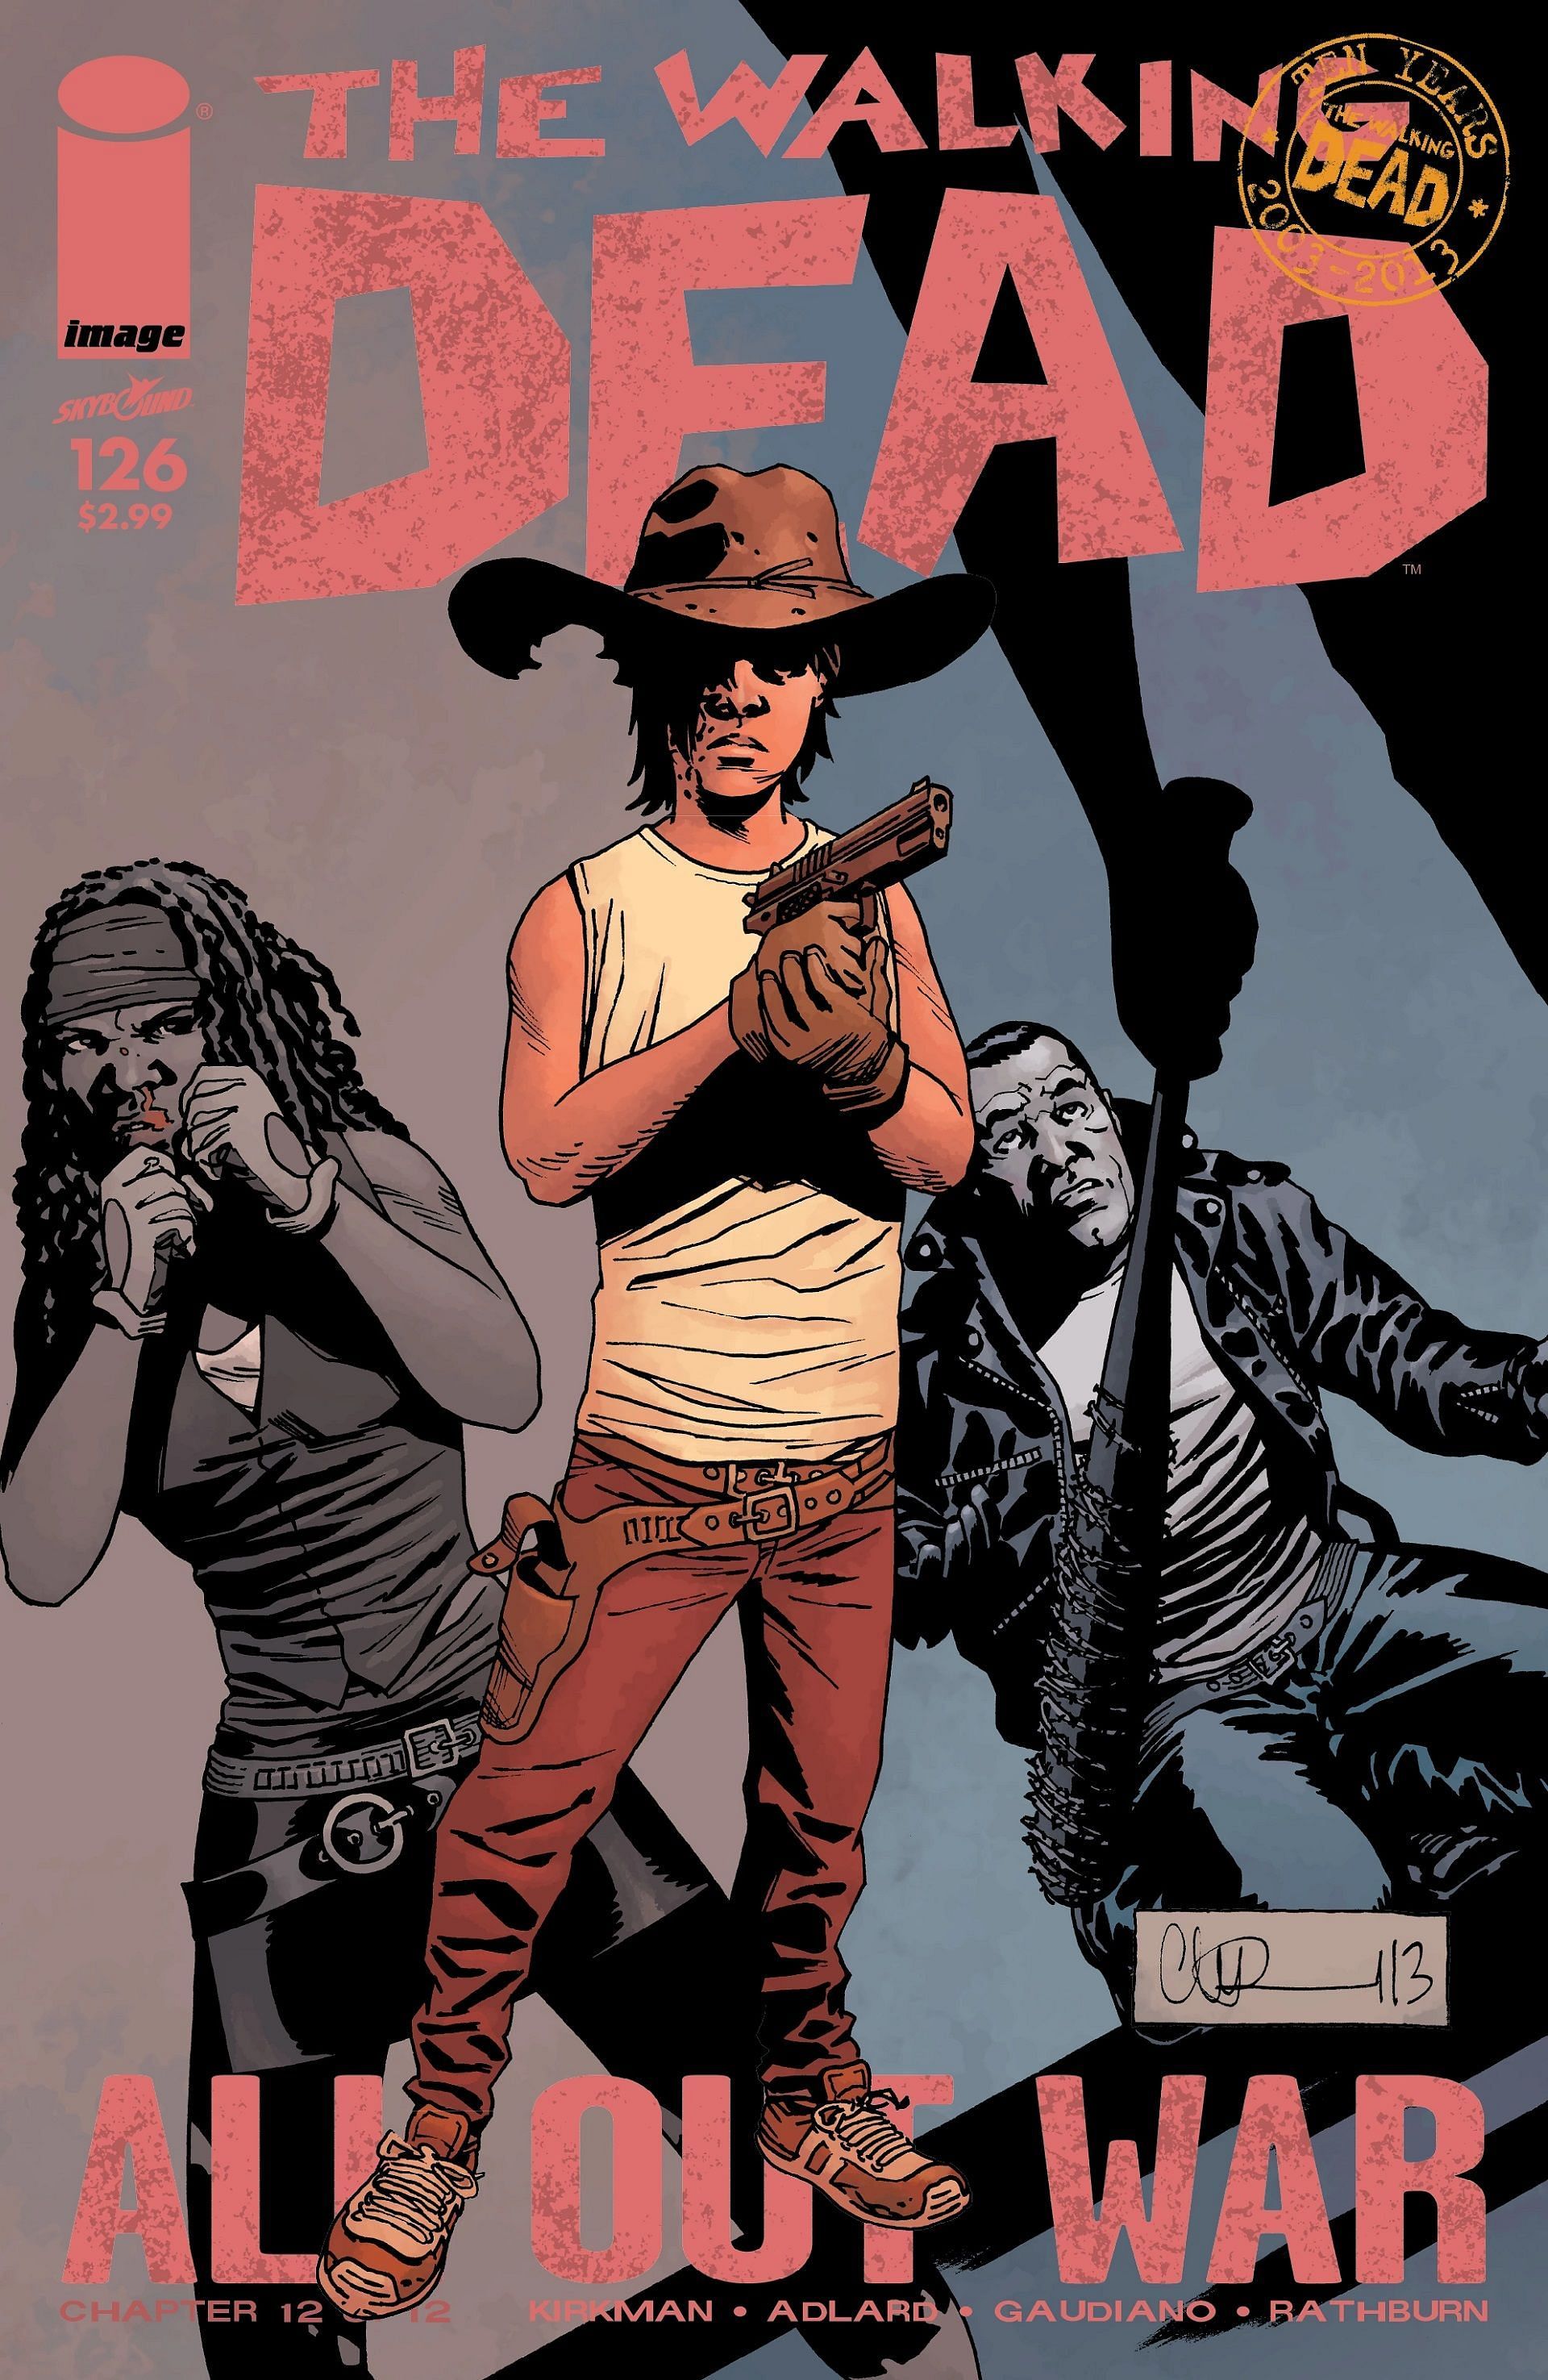 The Walking Dead shows an entire city taken over by Zombies (Image via Image comics)